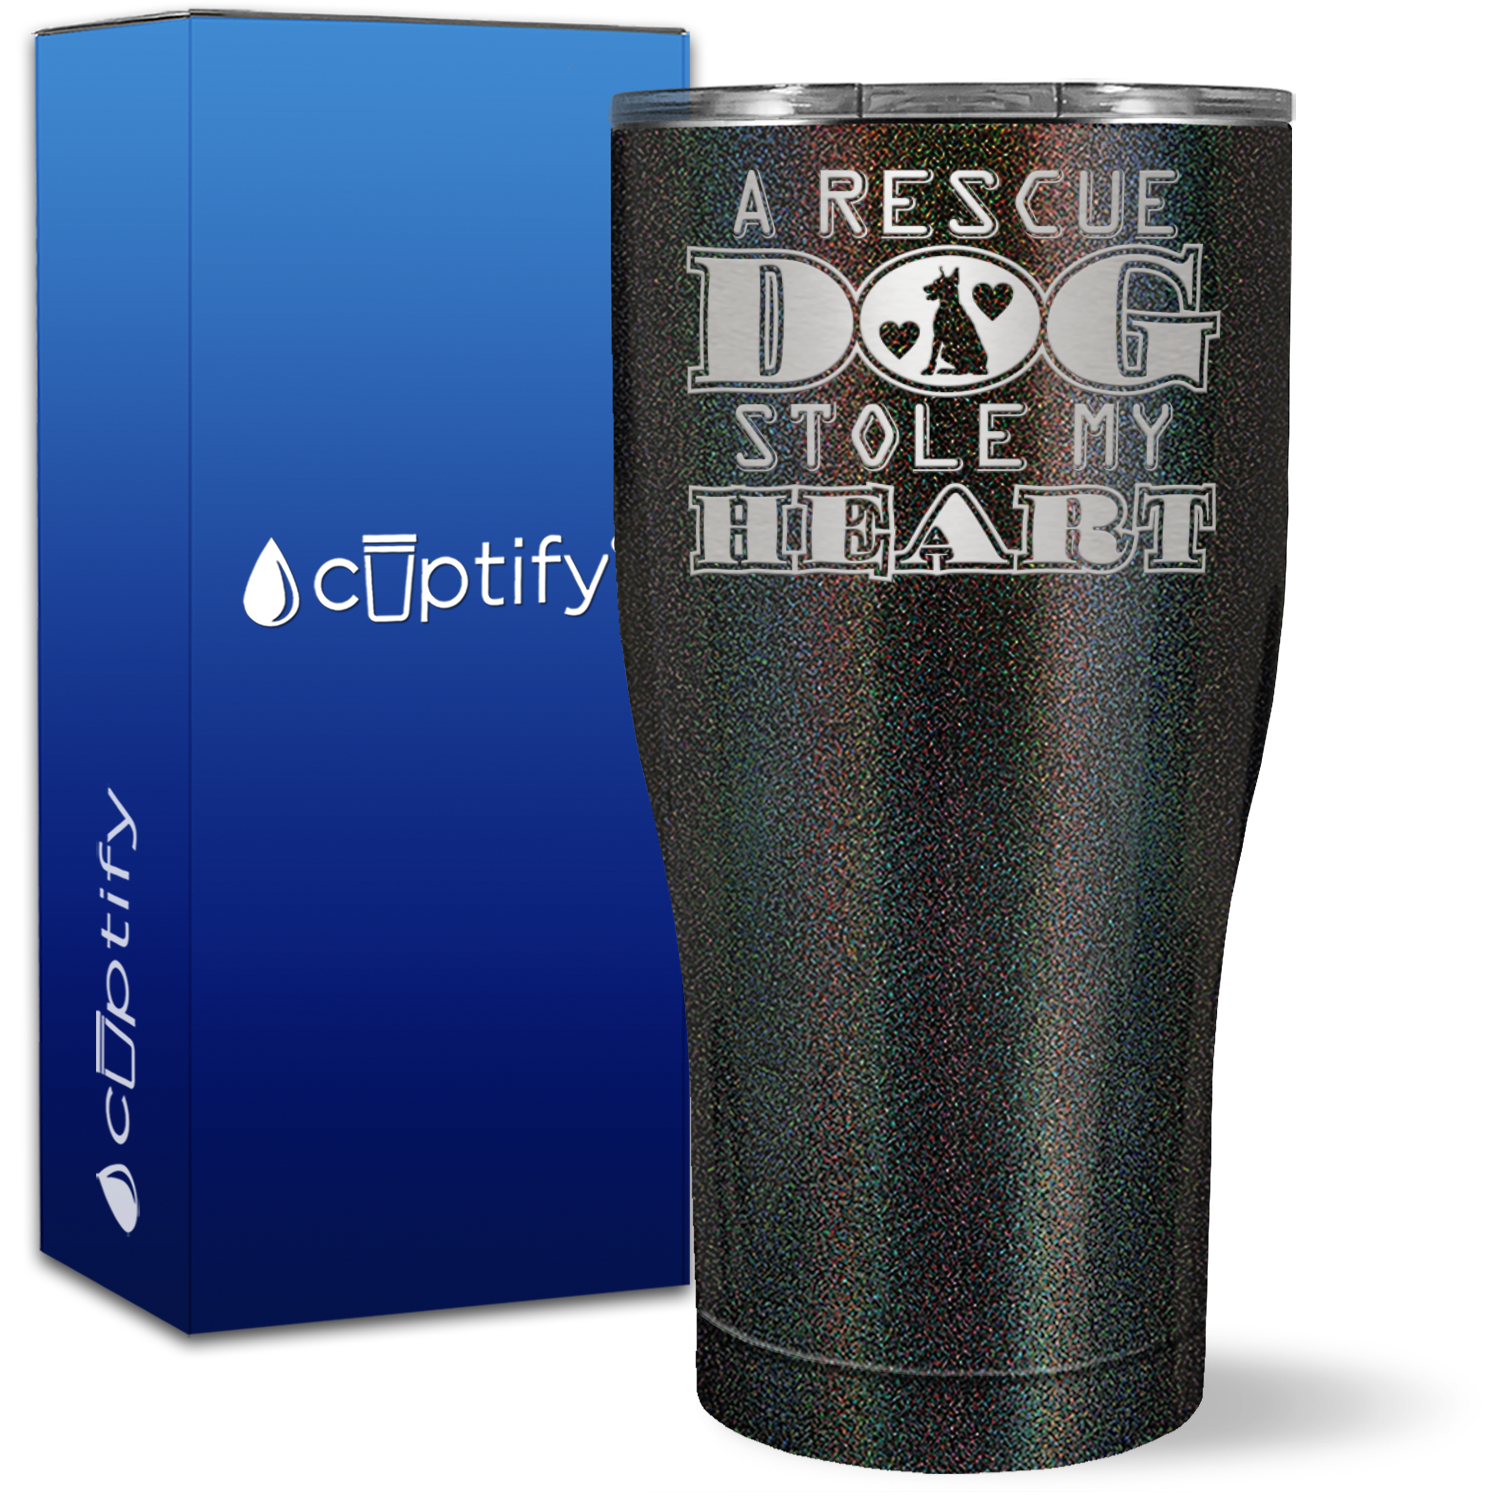 A Rescue Dog Stole My Heart on 27oz Curve Tumbler